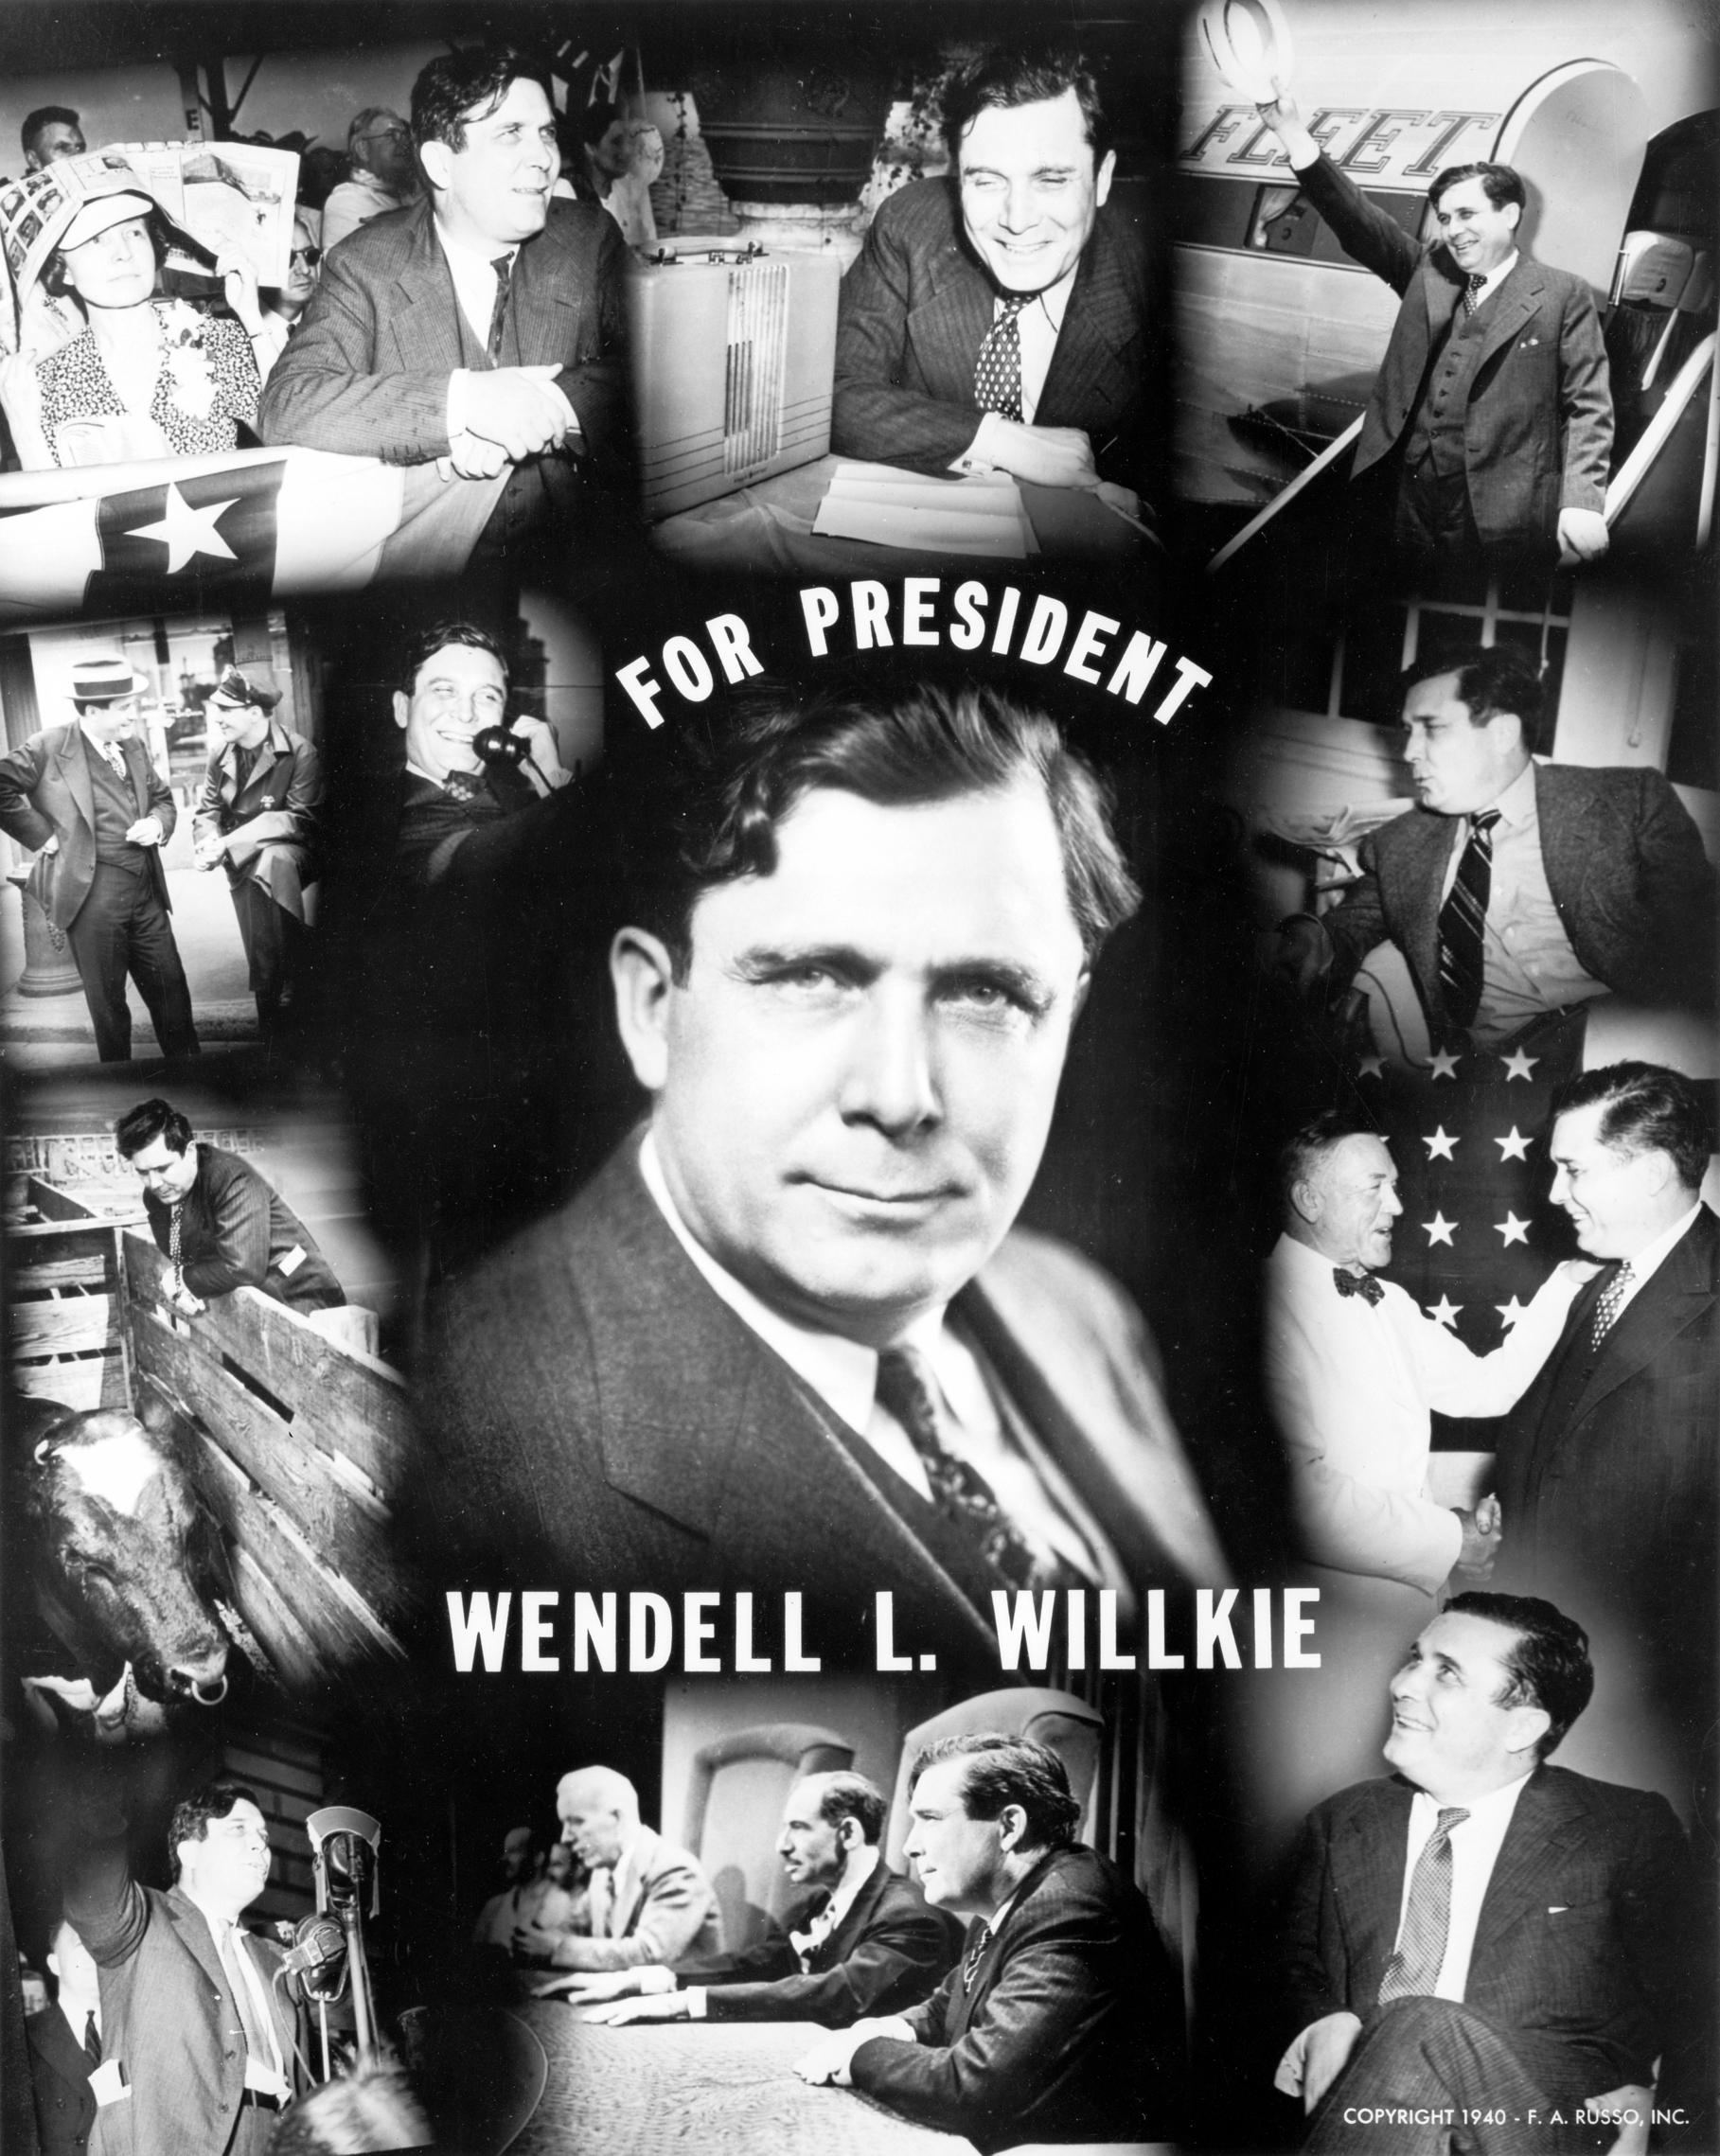 Wendell_Willkie_presidential_campaign_poster_1940